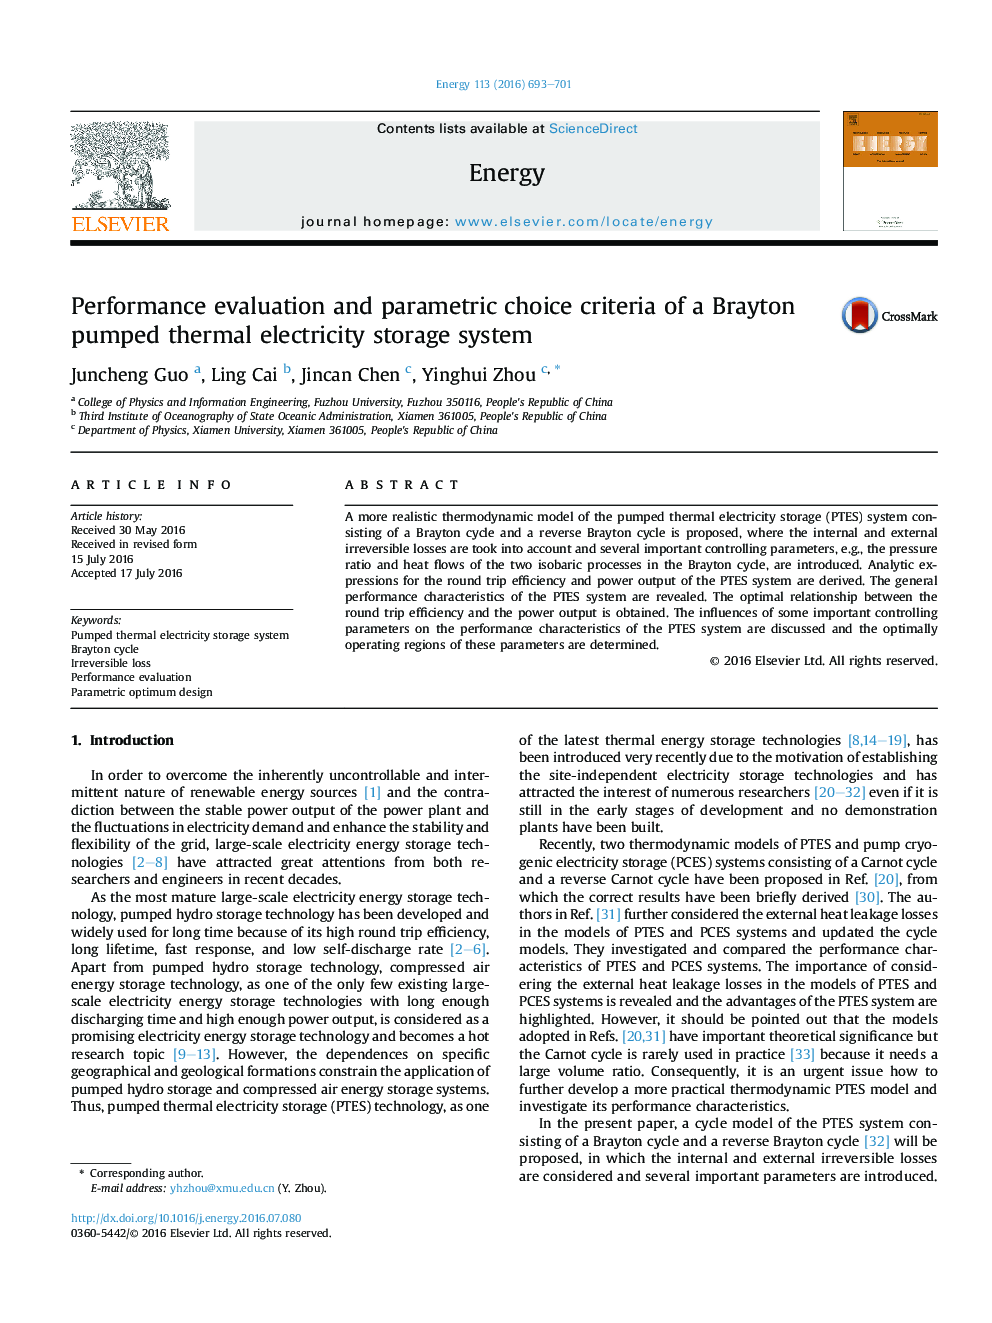 Performance evaluation and parametric choice criteria of a Brayton pumped thermal electricity storage system